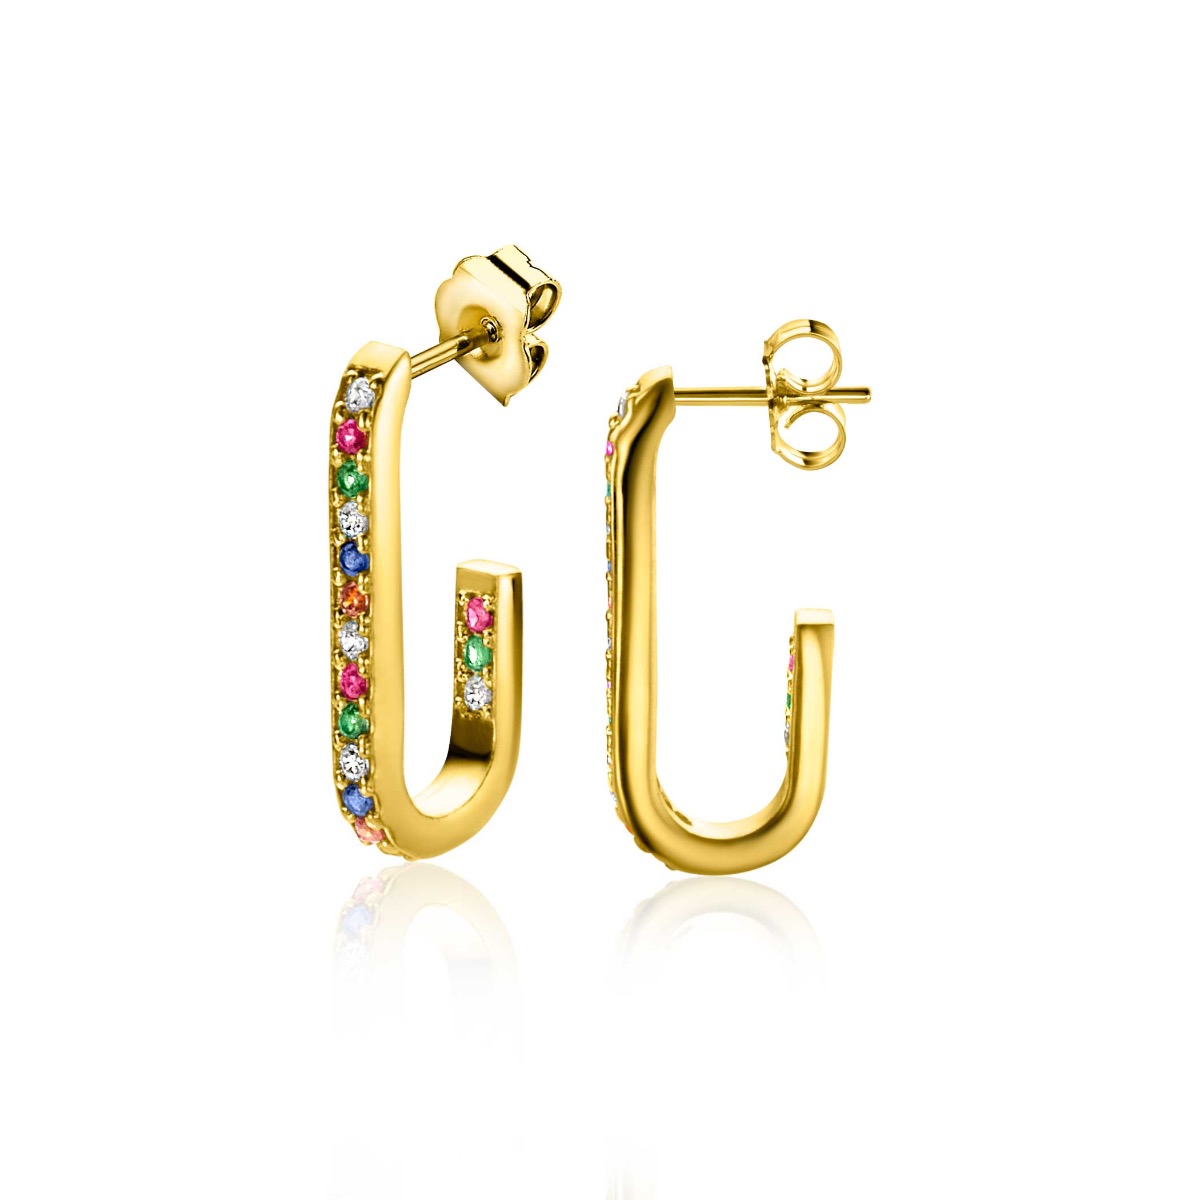 20mm ZINZI Gold Plated Sterling Silver Earrings with Oval Shape Set with Rainbow Zirconias ZIO2310YMC